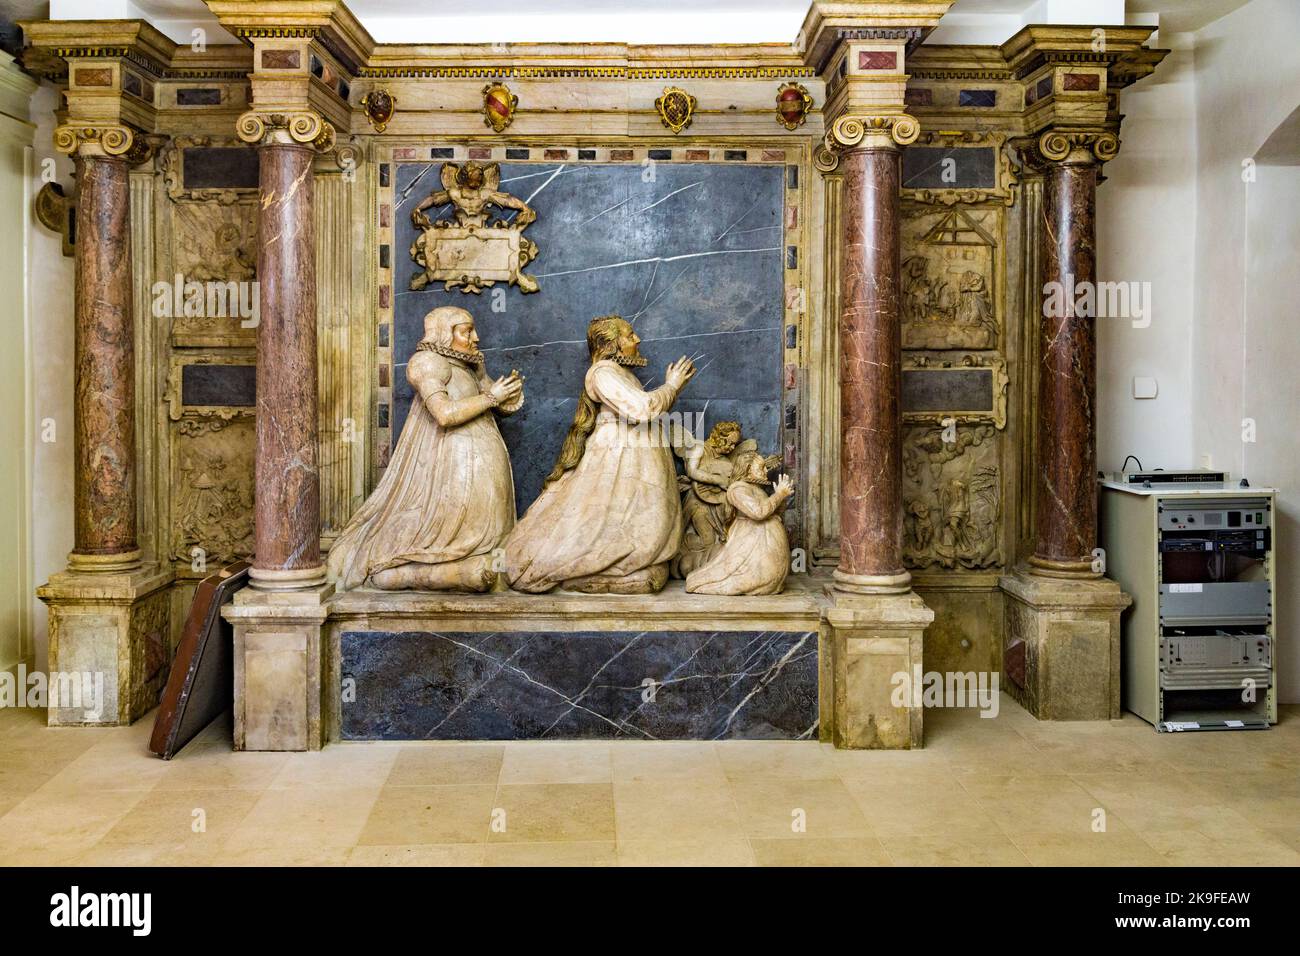 WEIMAR, GERMANY - DEC 19, 2015: sculpture of The Magi also referred to as the Three Wise Men or Three Kings,  in the Gospel of Matthew in Church St. P Stock Photo